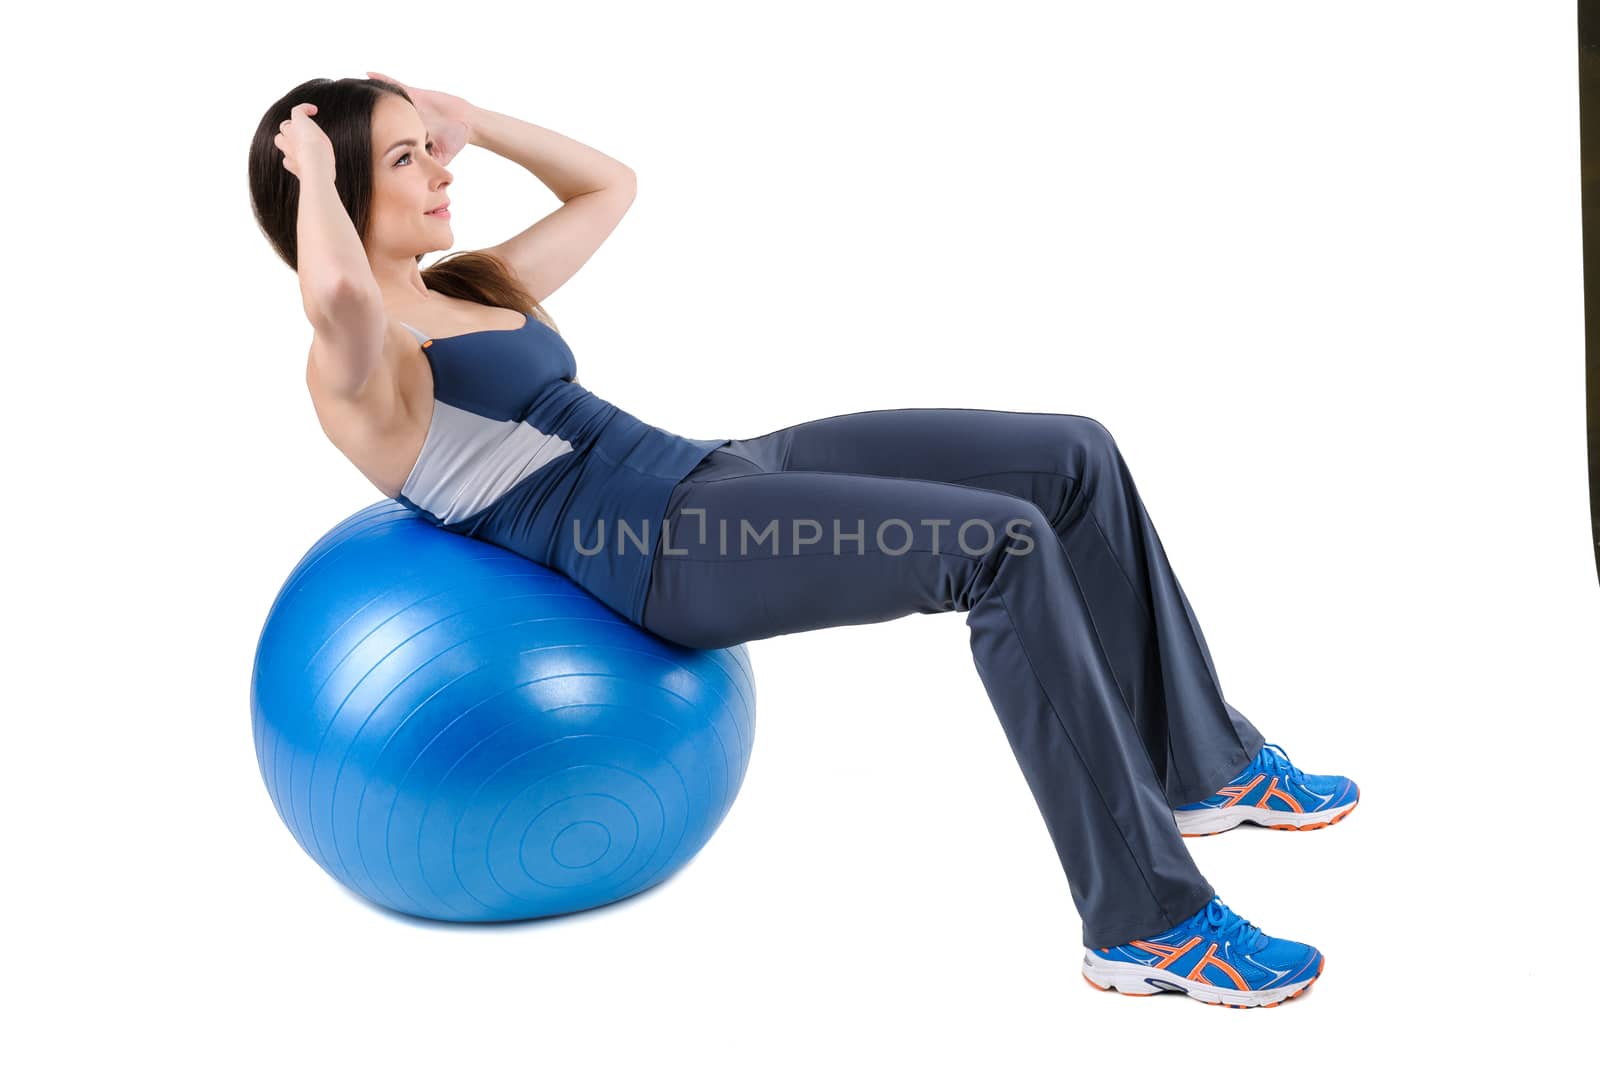 Abdominal Fitball Exercises by starush